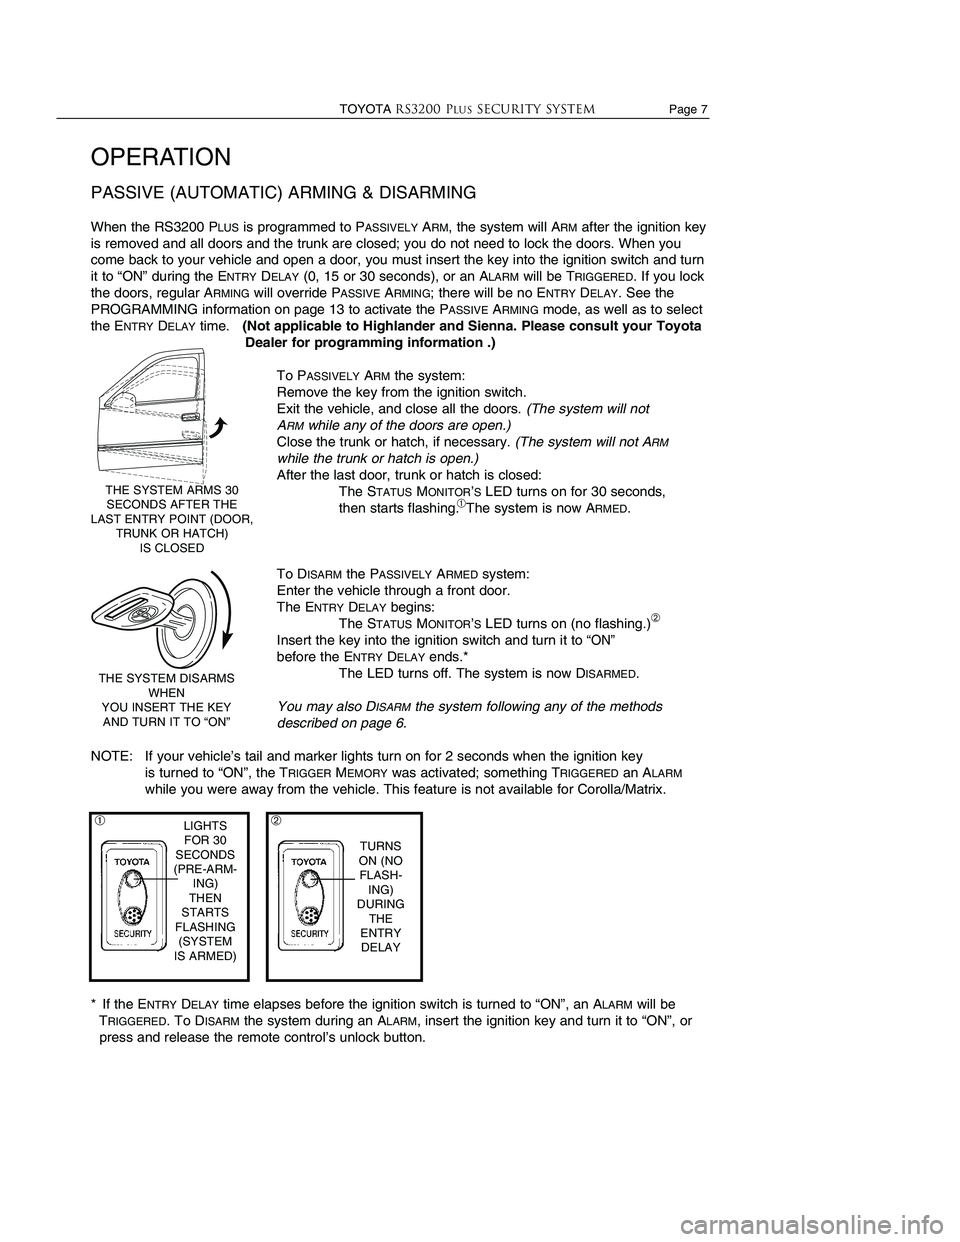 TOYOTA SOLARA 2002  Accessories, Audio & Navigation (in English) Page 6                    TOYOTARS3200 PLUSSecurity system
OPERATION
DISARMING THE RS3200 PLUS(except PASSIVE DISARMING)
The system may be DISARMEDin several ways. Do one of the following: 
Unlock the